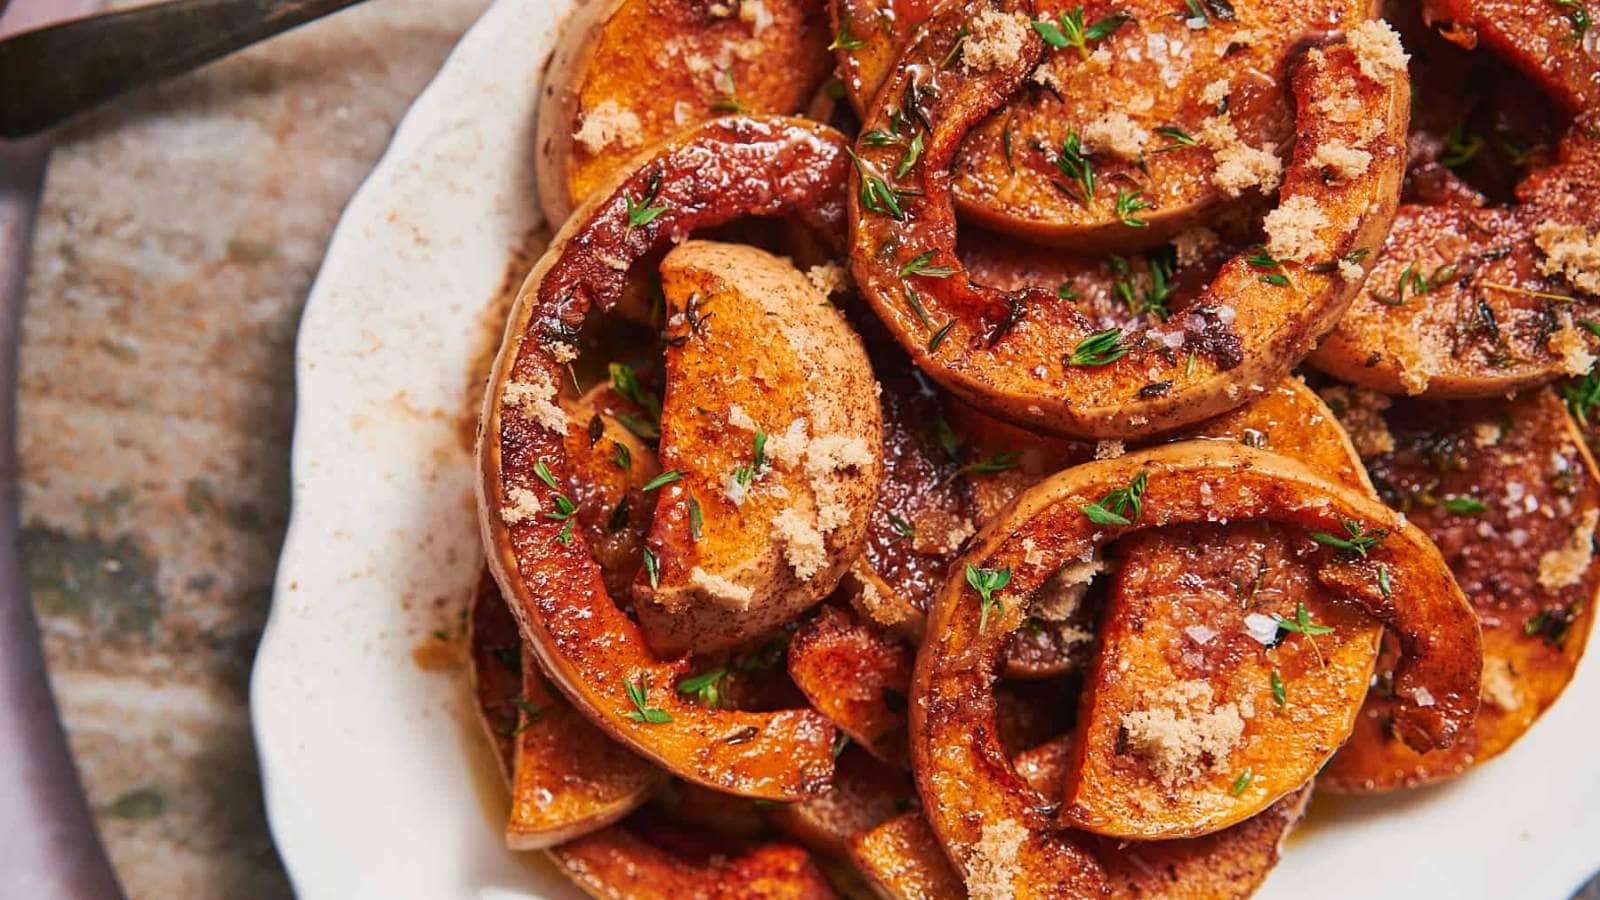  Roasted Butternut Squash with Brown Sugar recipe by A Full Living.